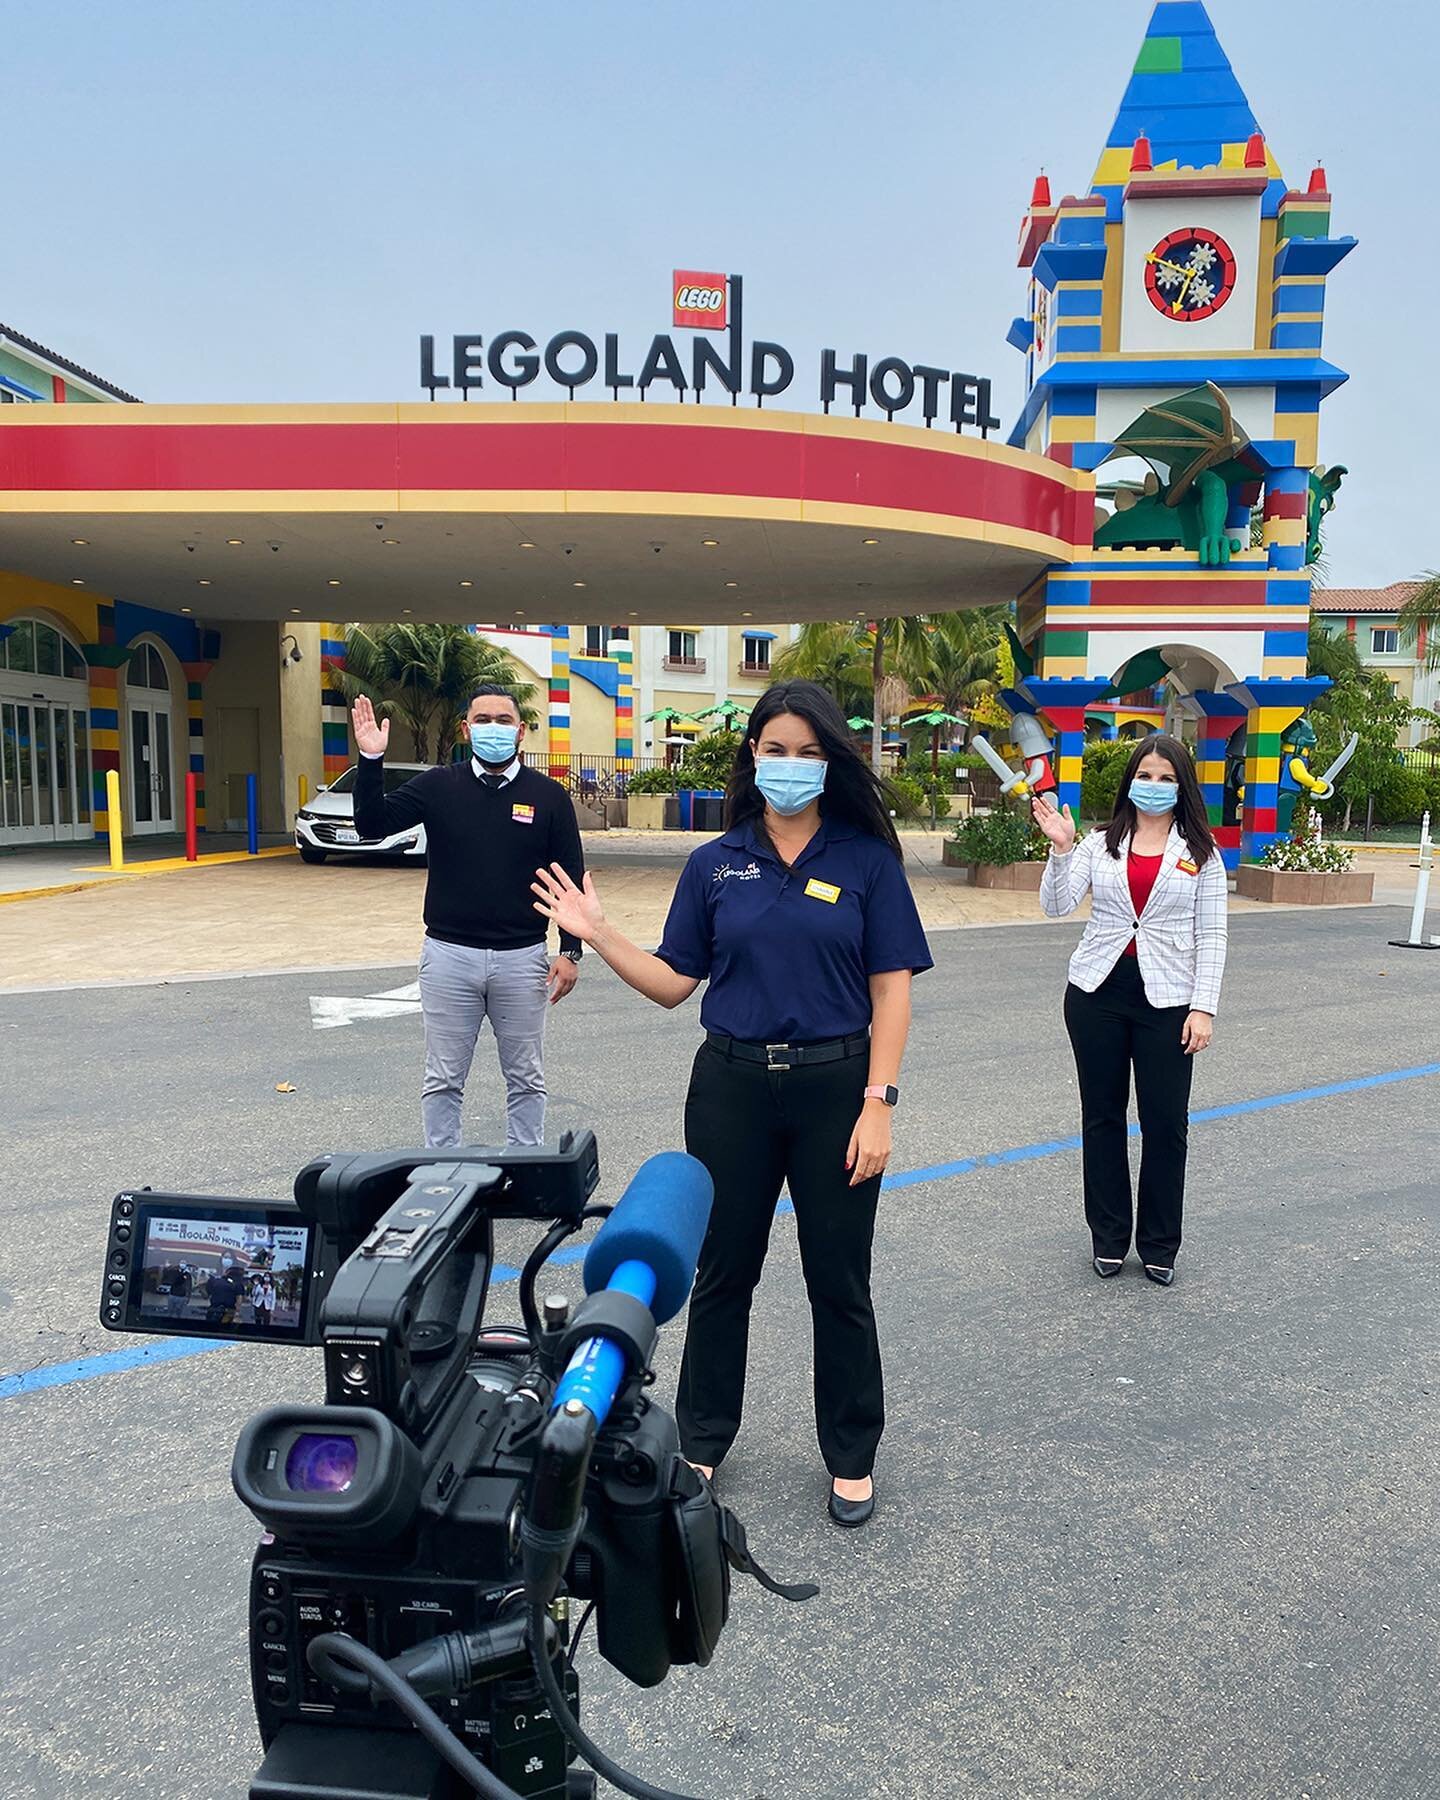 Today was definitely one for the books. After a year-long closure, @legolandcalifornia officially reopened to the public 🎉

The energy around the Park was incredible. My heart was full of joy seeing families enjoying the attractions &amp; MC&rsquo;s